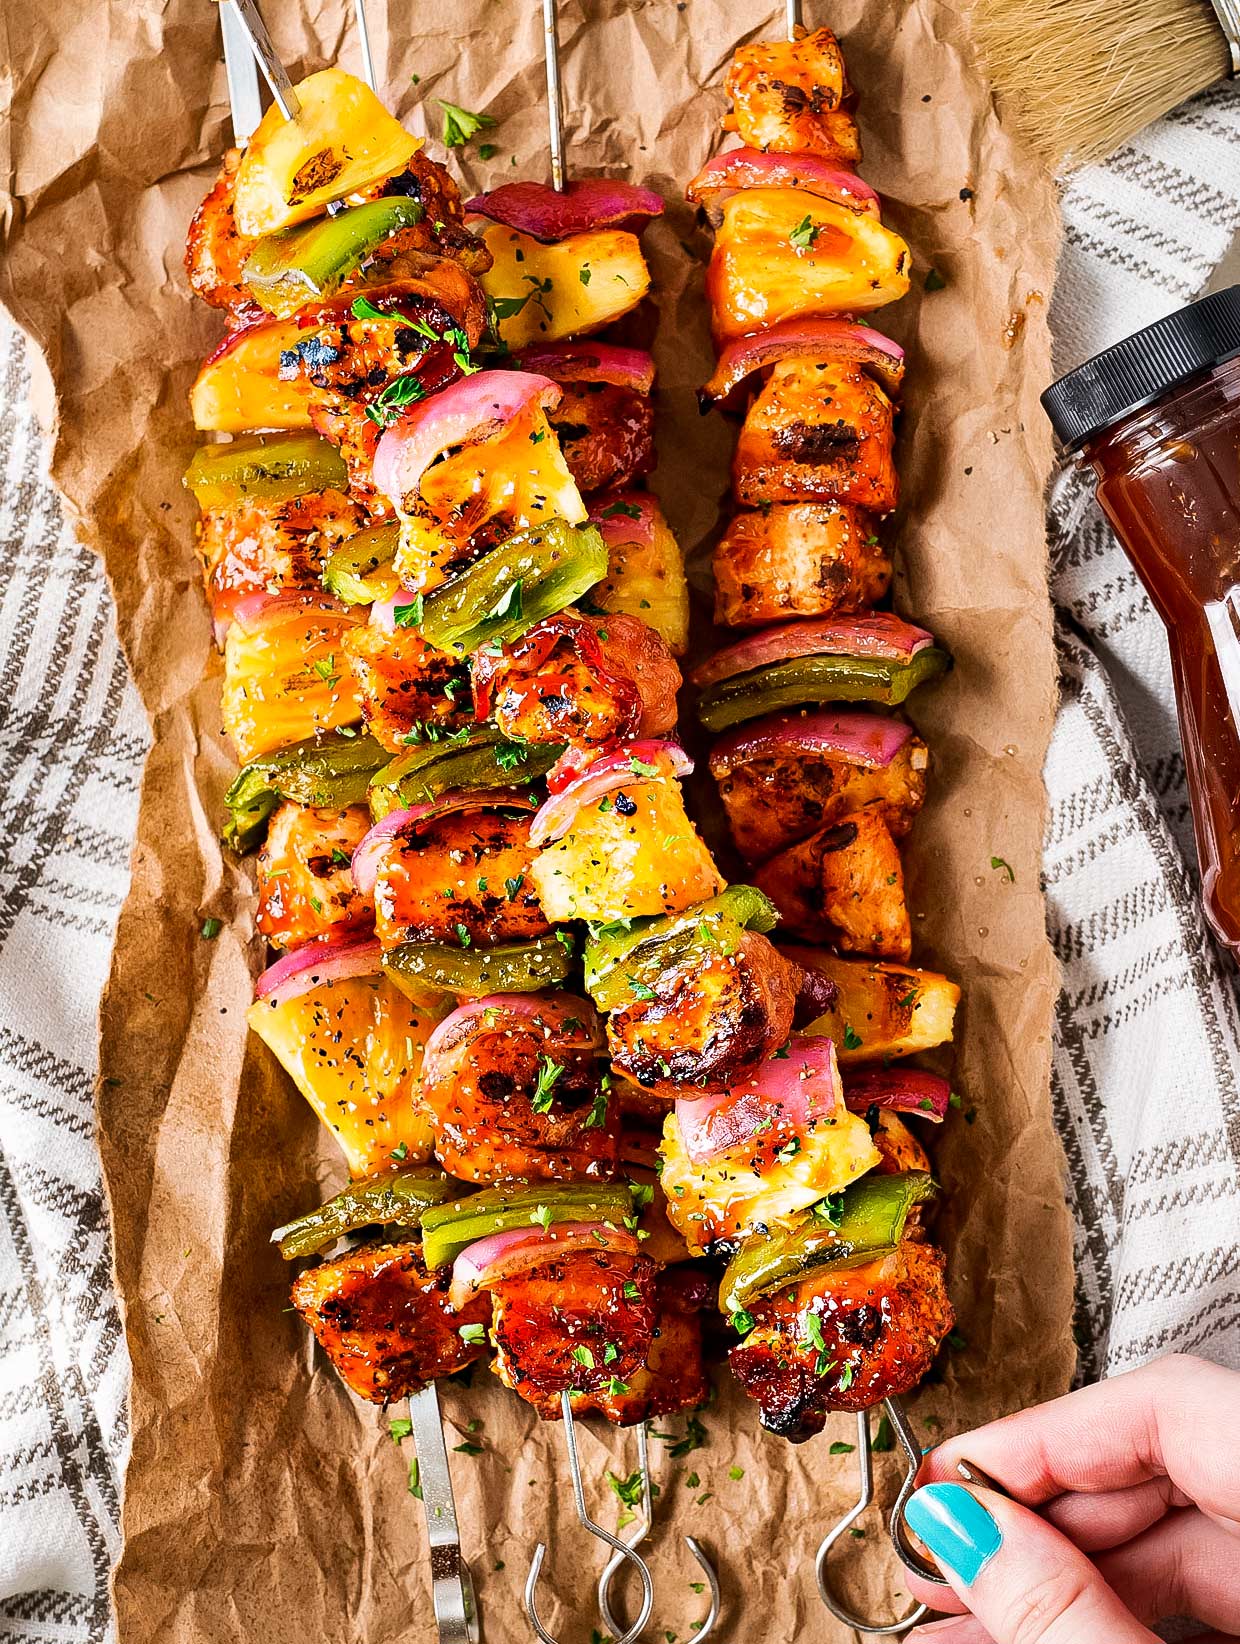 https://www.thechunkychef.com/wp-content/uploads/2017/08/Grilled-BBQ-Chicken-Kabobs-2-1.jpg